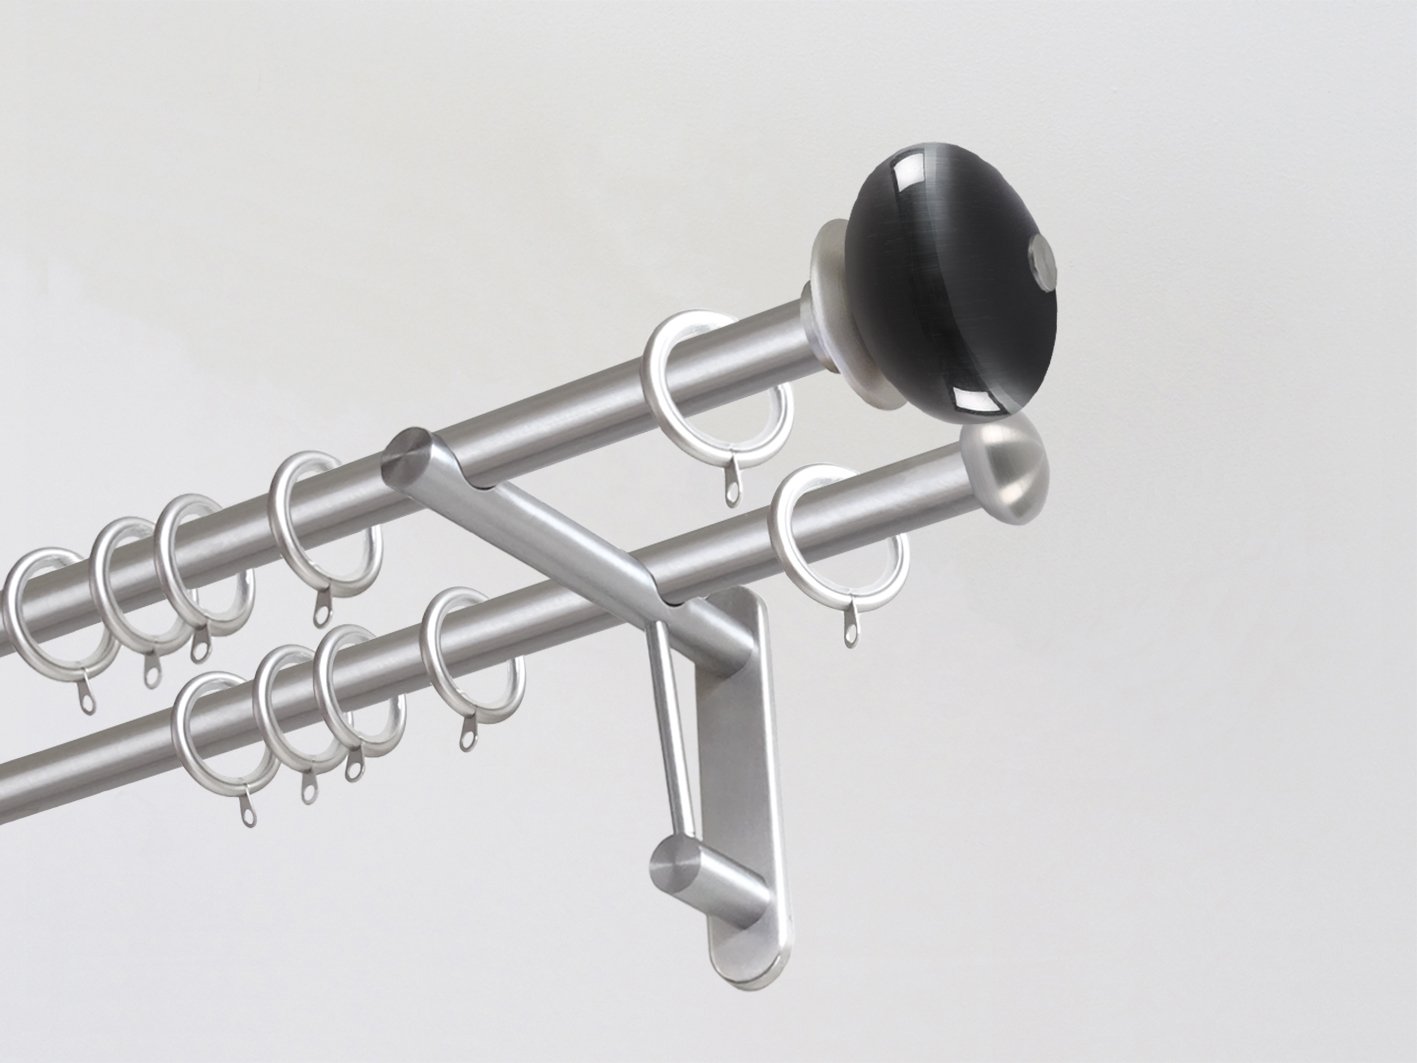 Double 19mm stainless steel curtain pole duo system set with glass moonstone finials in graphite